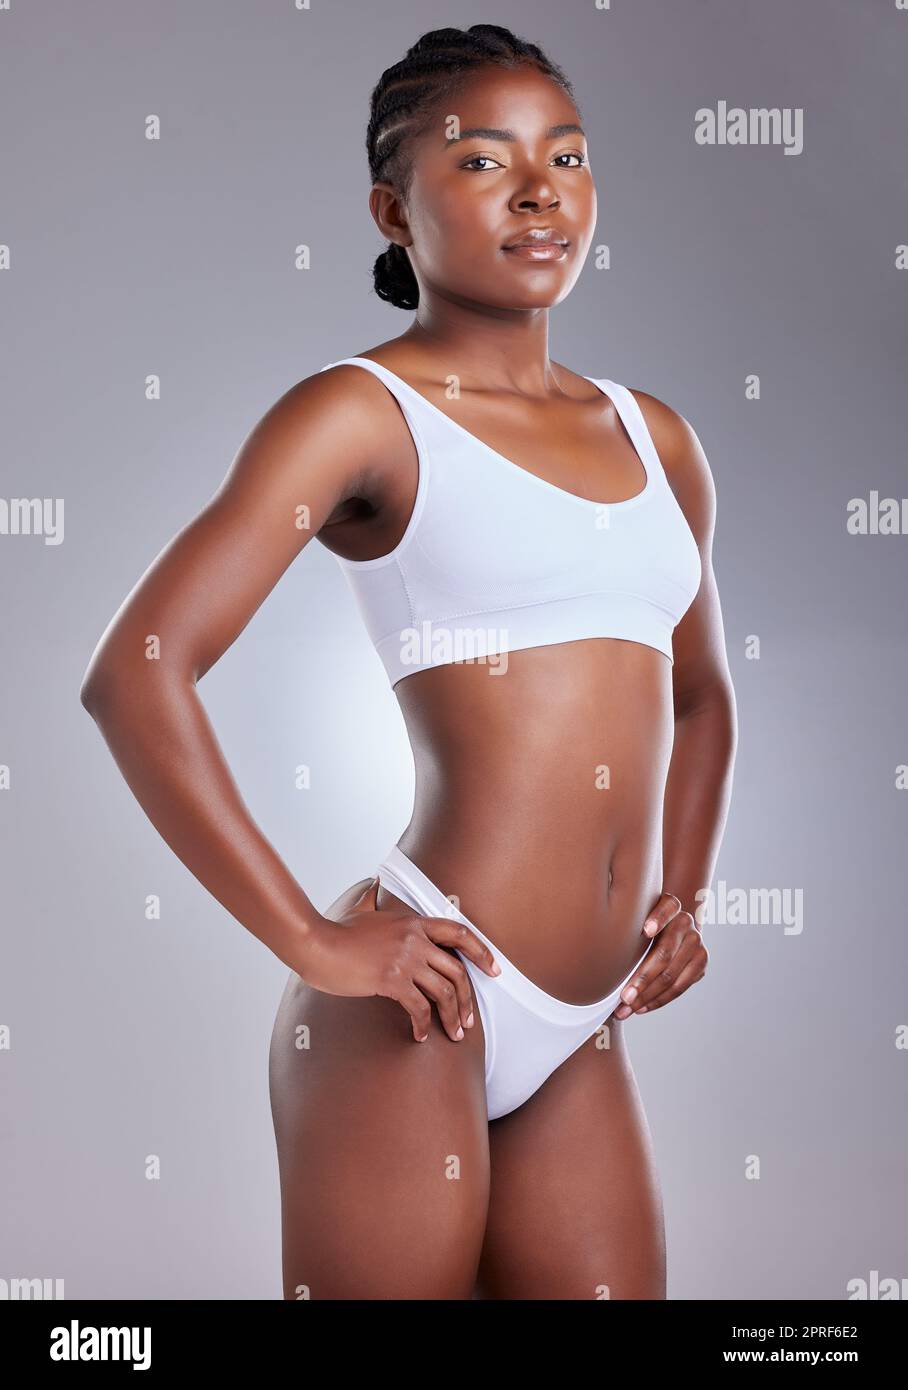 The strength of a woman shouldnt be underestimated. a young woman posing with her arms akimbo against a studio background Stock Photo